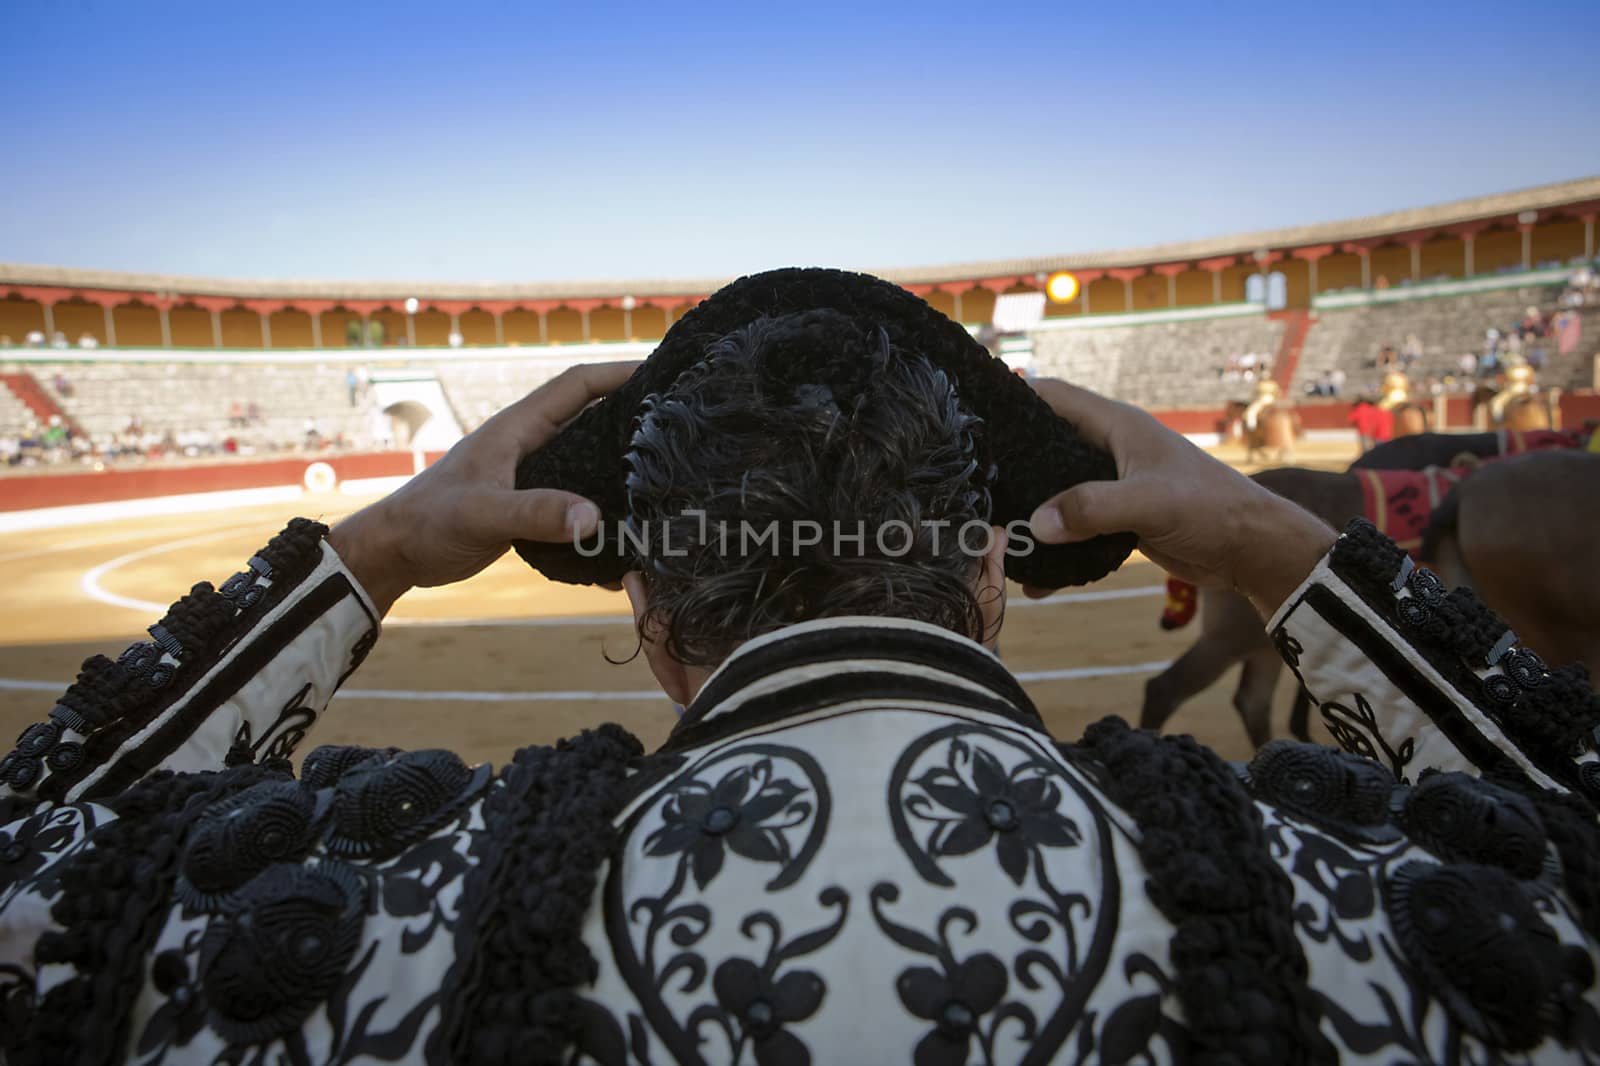 Bullfighter by contacting the montera during a bullfight, Spain